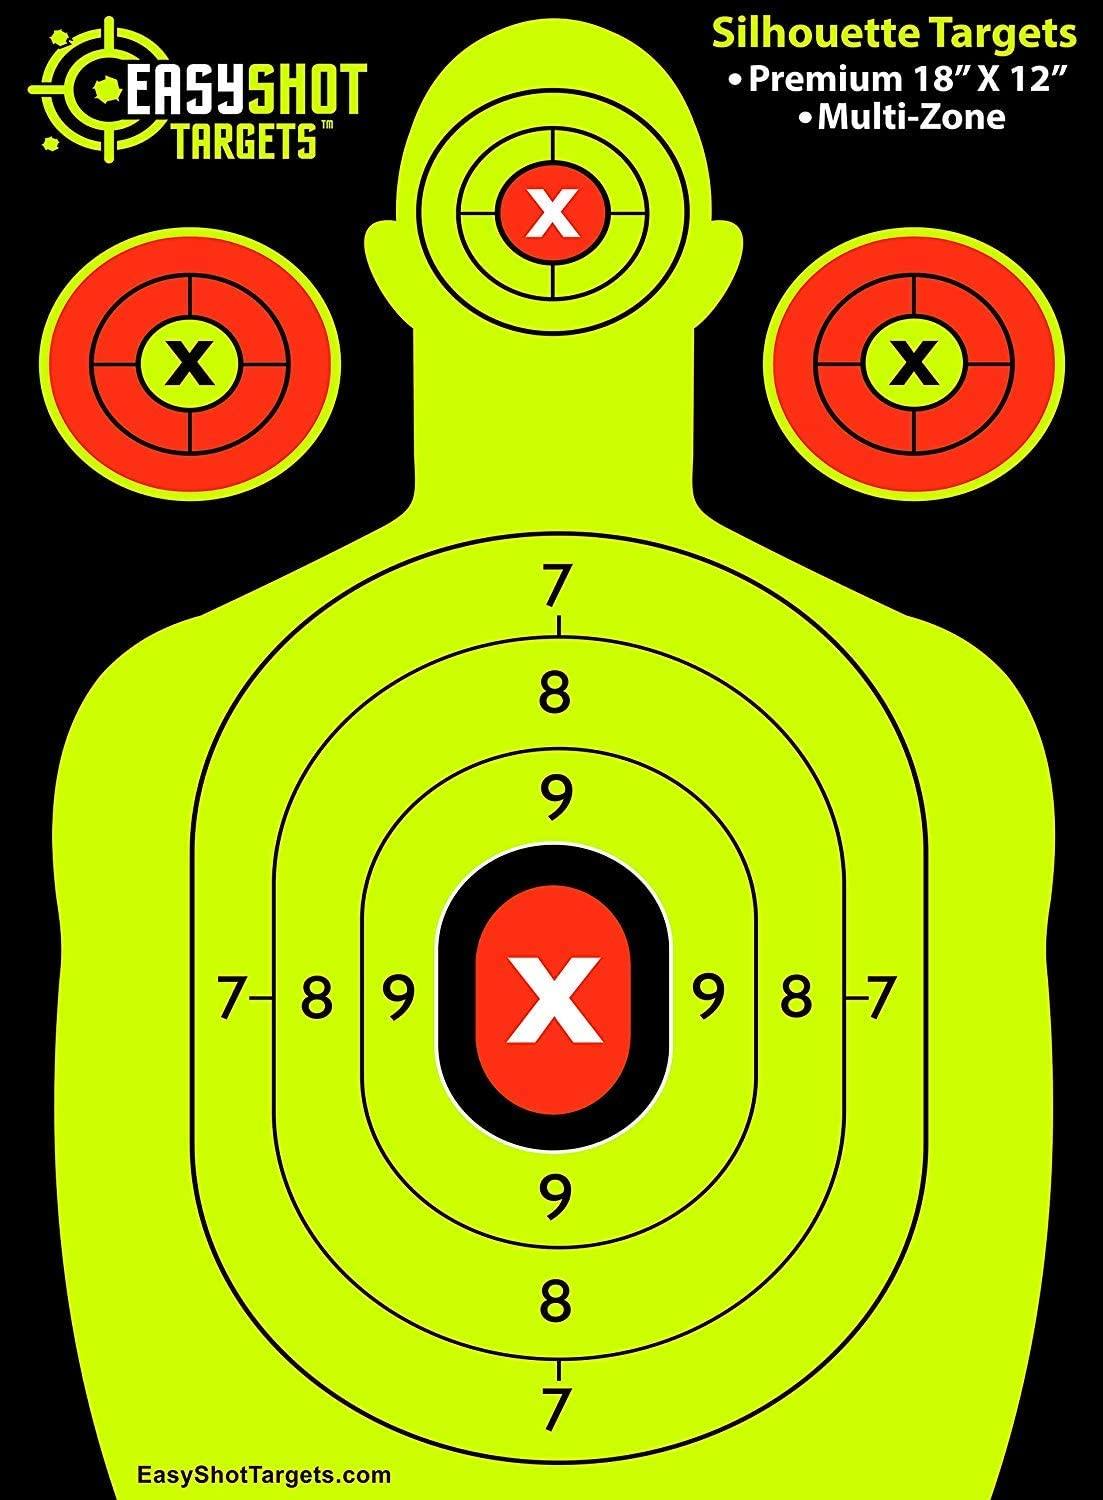 40 Pack - Multicolor: Green, Orange, Blue, Yellow - Silhouette Targets - EasyShot Targets